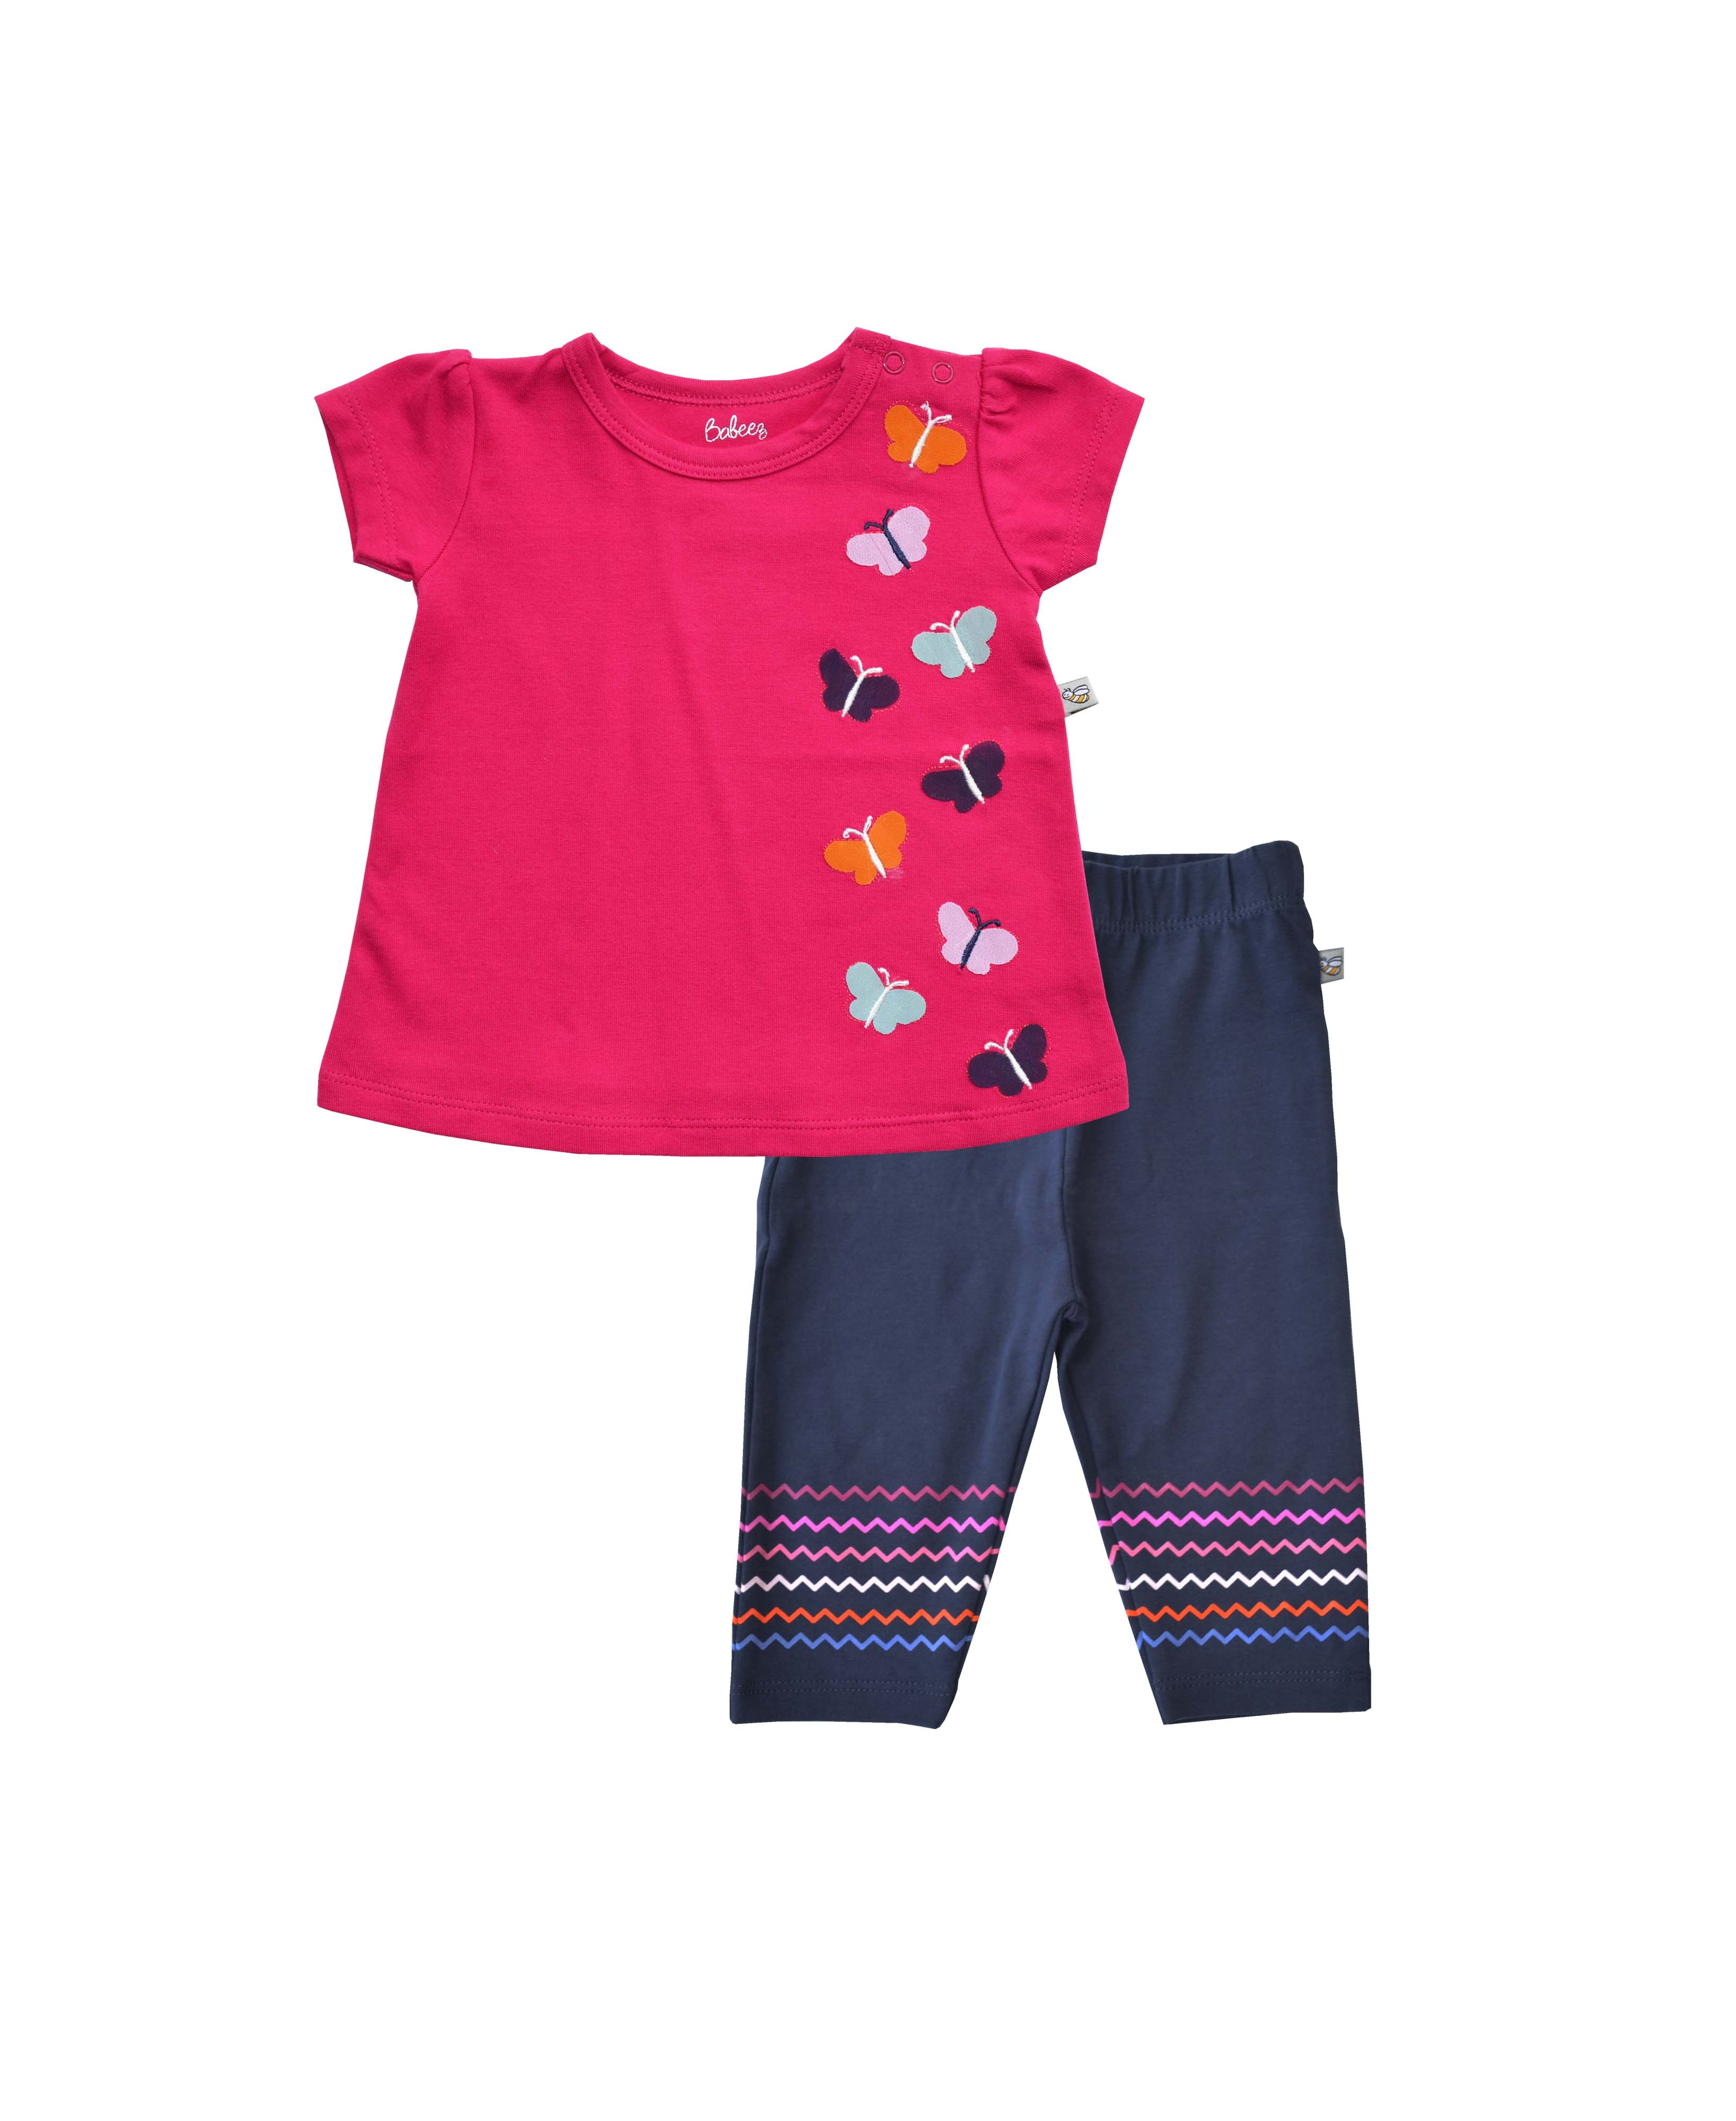 Babeez | Butterfly Applique on Pink Short Sleeves Top and Navy Legging with Wave Print at Bottom (95%Cotton 5%Elasthan Jersey) undefined